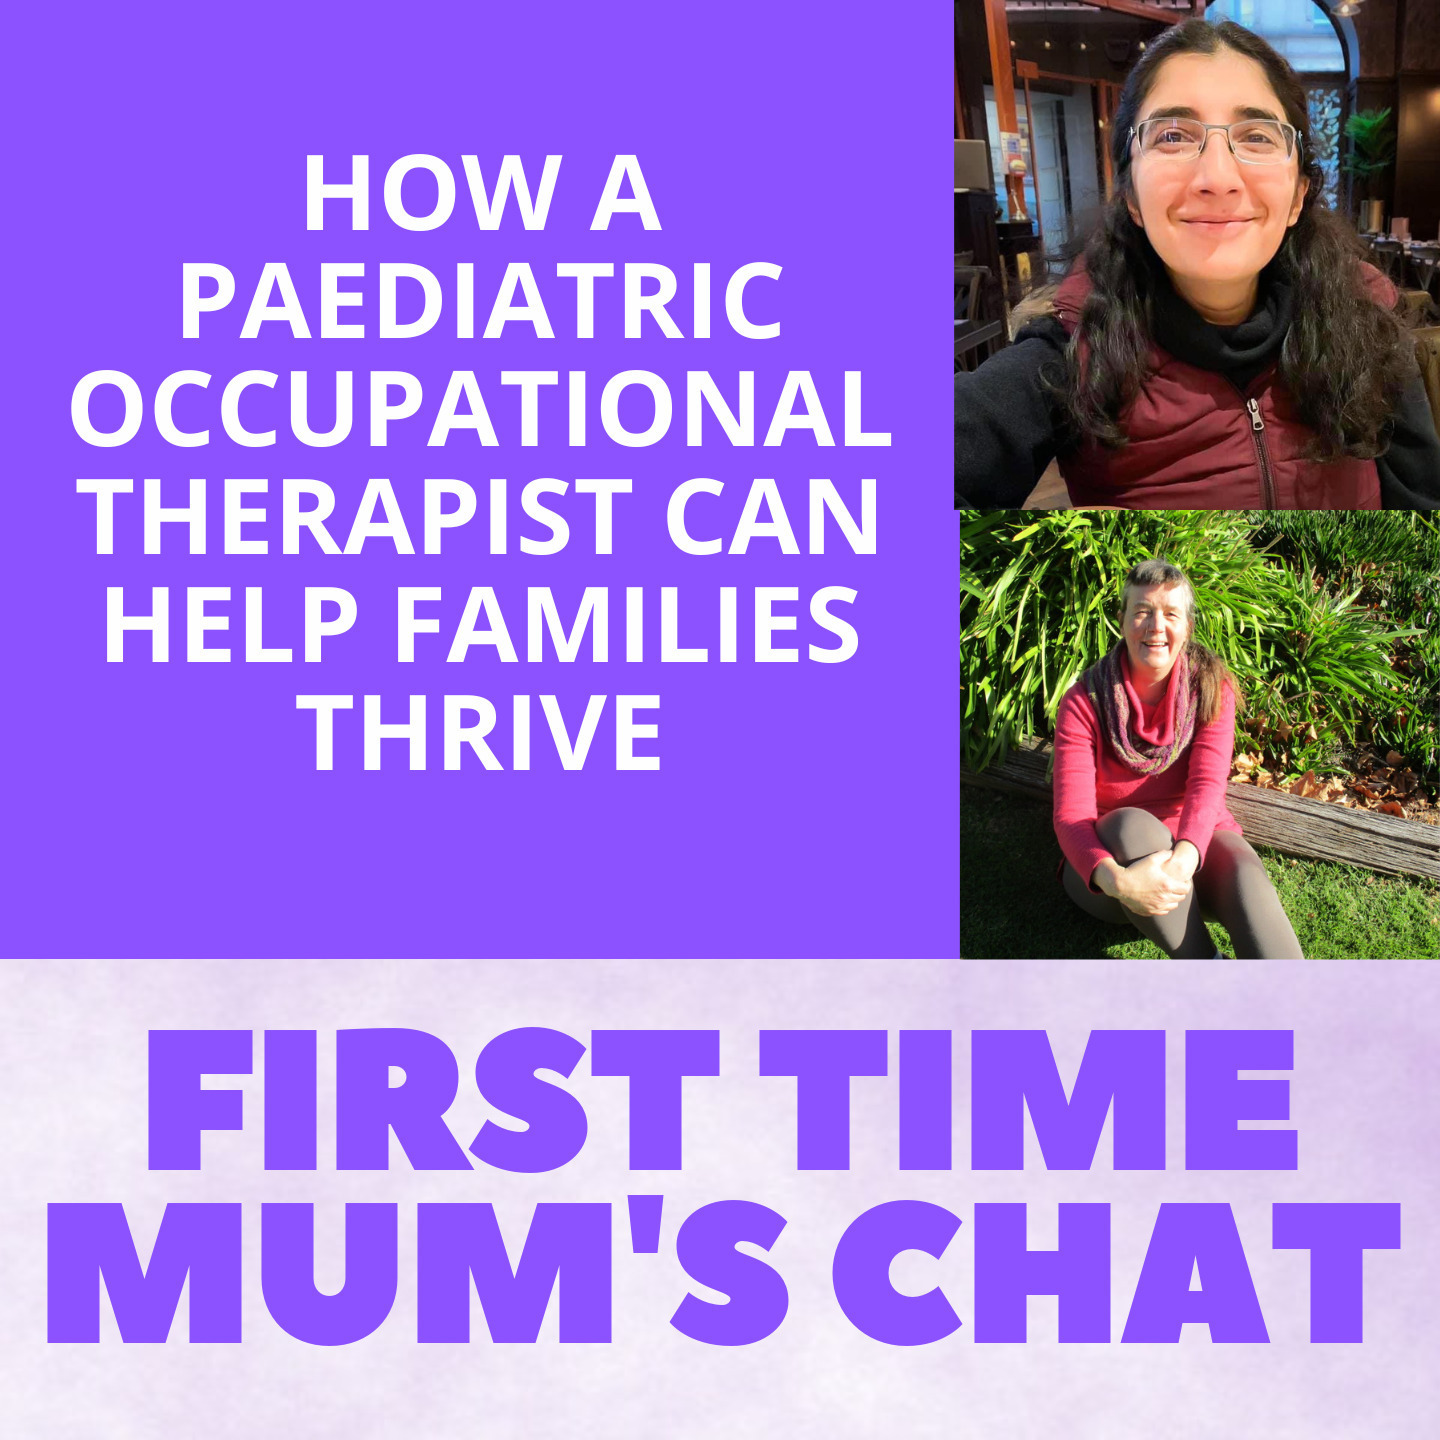 How a Paediatric Occupational Therapist Can Help Families Thrive